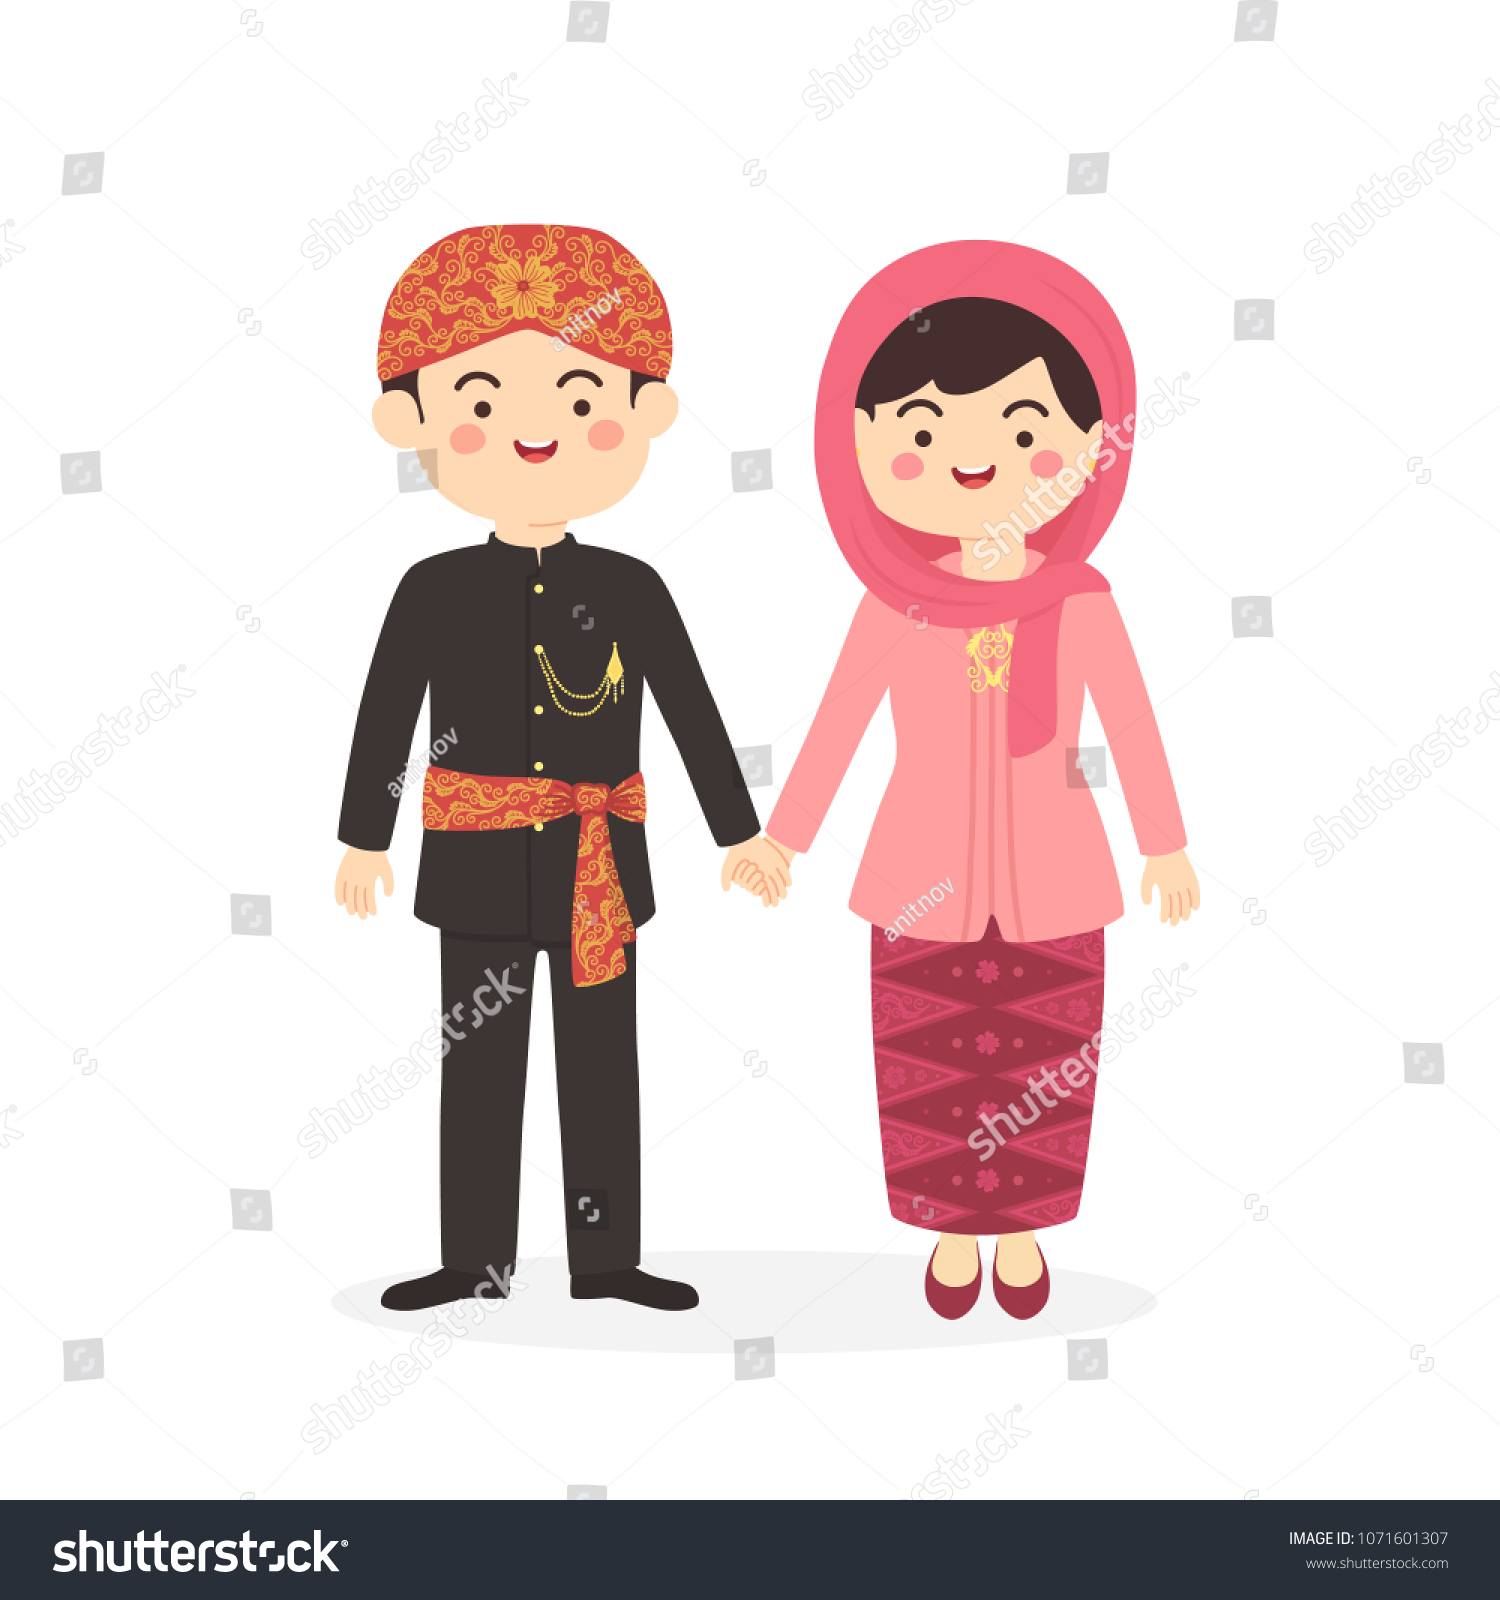 SVG of Betawi Jakarta Indonesia Couple, cute Abang None traditional clothes costume man woman cartoon vector illustration svg